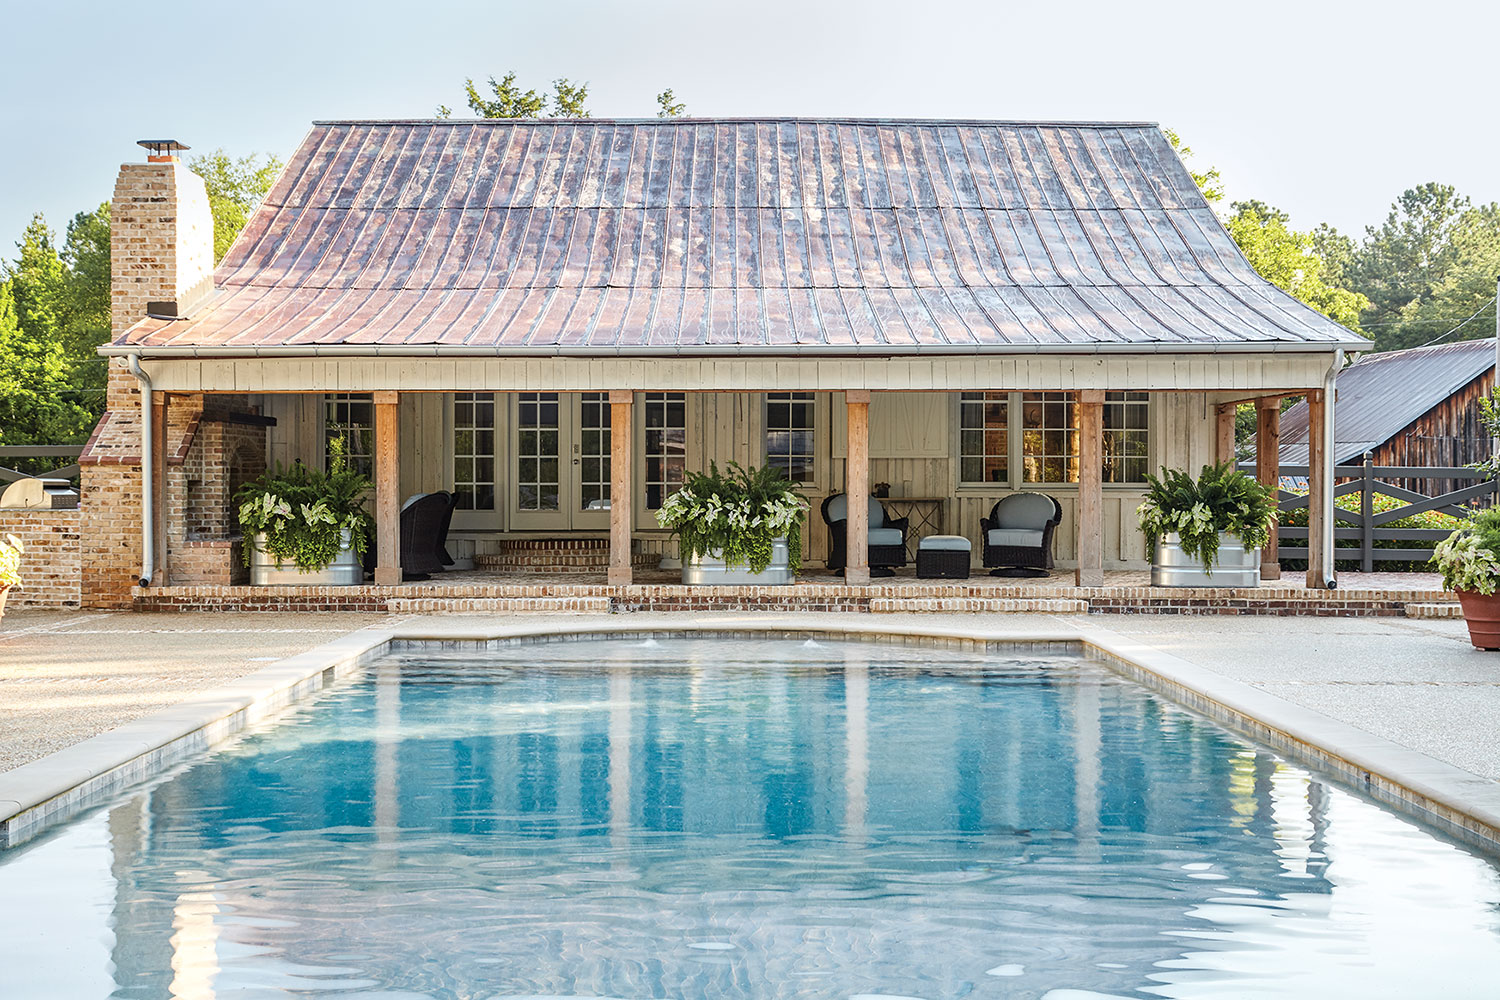 A blue pool leads to a covered brick patio of the pool house, which features wood columns across the front and an aged metal roof and brick chimney